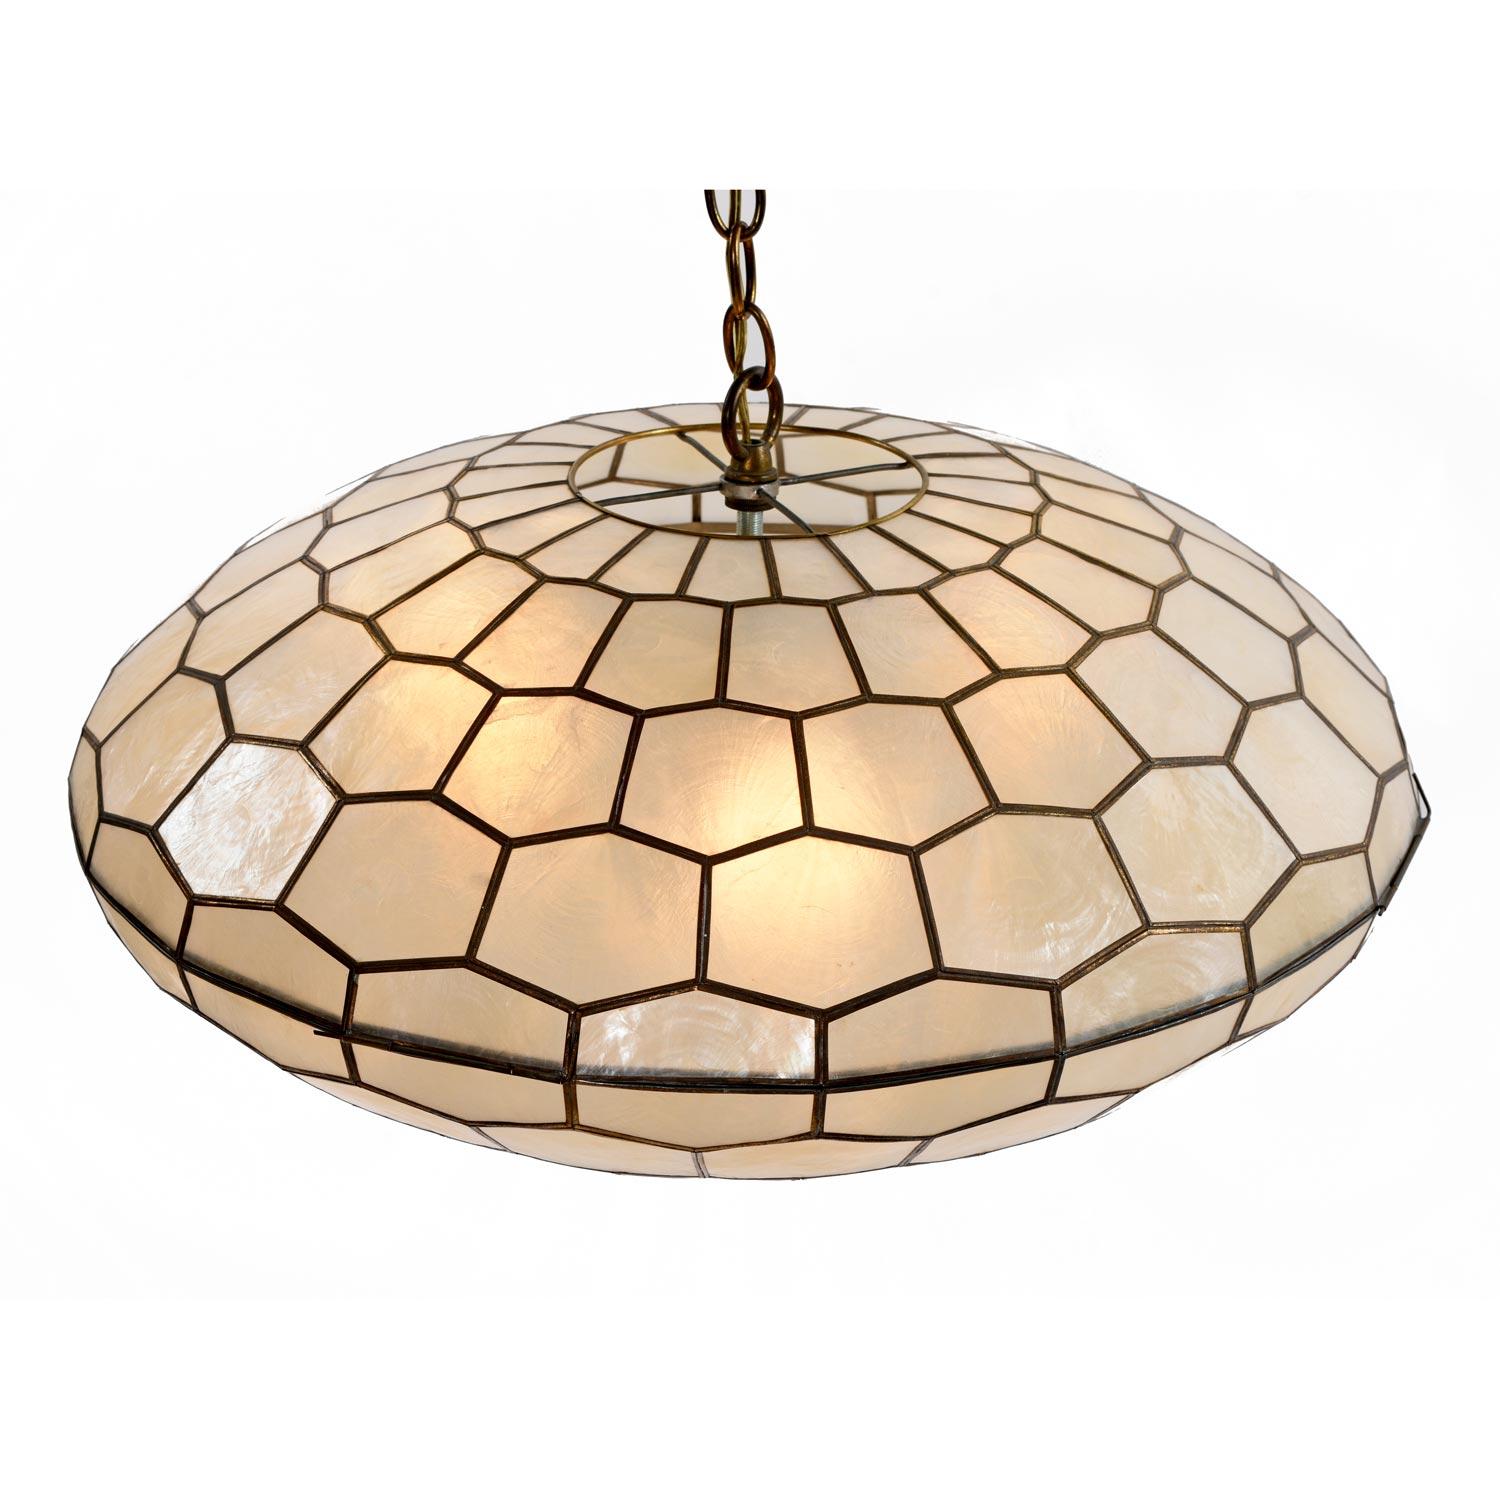 Vintage saucer shaped capiz shell pendant light. The dramatic pendant light fixture mounts to the ceiling and hangs on a 15' long chain with cord. The luxurious lamp is made from thin sheets of capiz shell that act as natural light diffusers. The